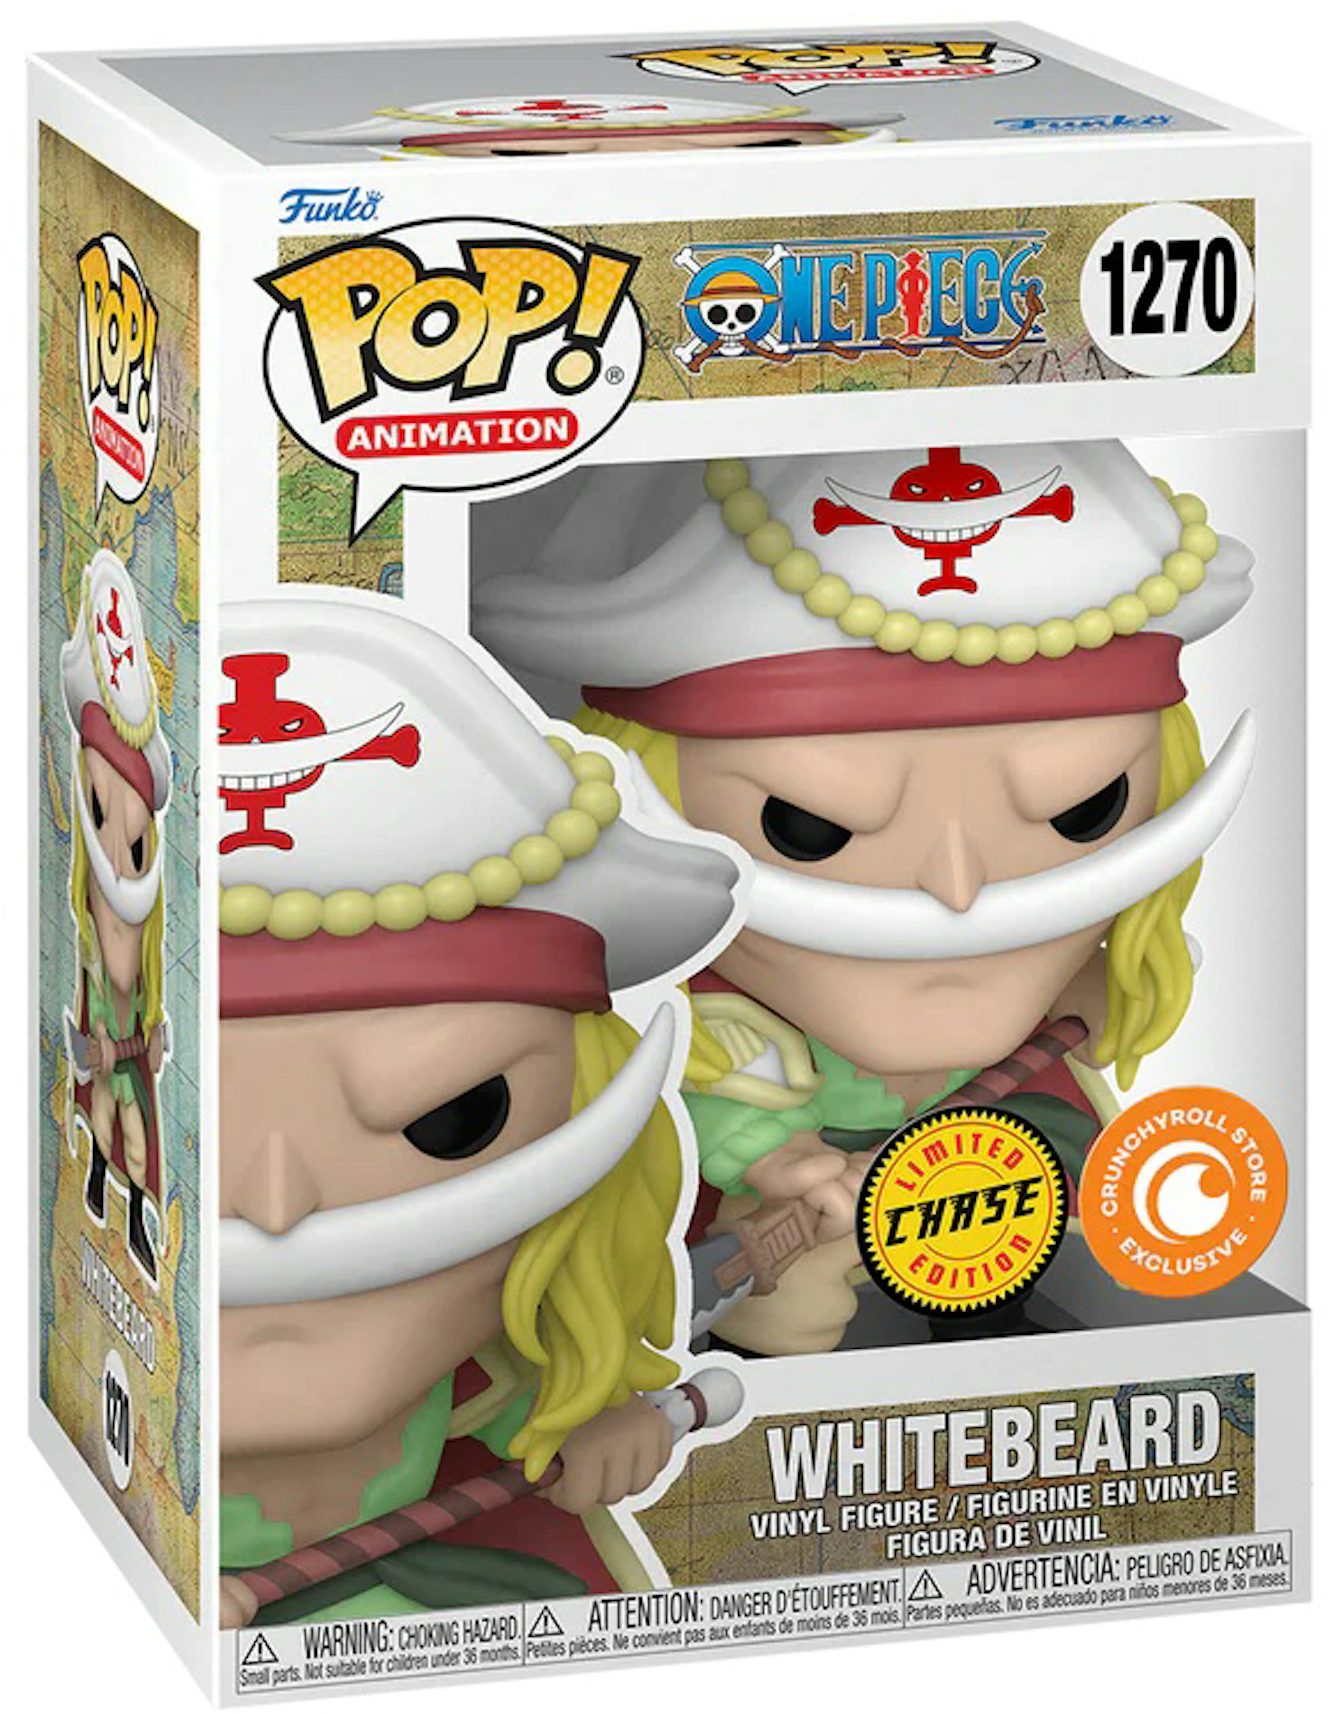 https://images.stockx.com/images/Funko-Pop-Animation-One-Piece-Whitebeard-Chase-Edition-Crunchy-Roll-Exclusive-Figure-1270.jpg?fit=fill&bg=FFFFFF&w=1200&h=857&fm=jpg&auto=compress&dpr=2&trim=color&updated_at=1676339575&q=60